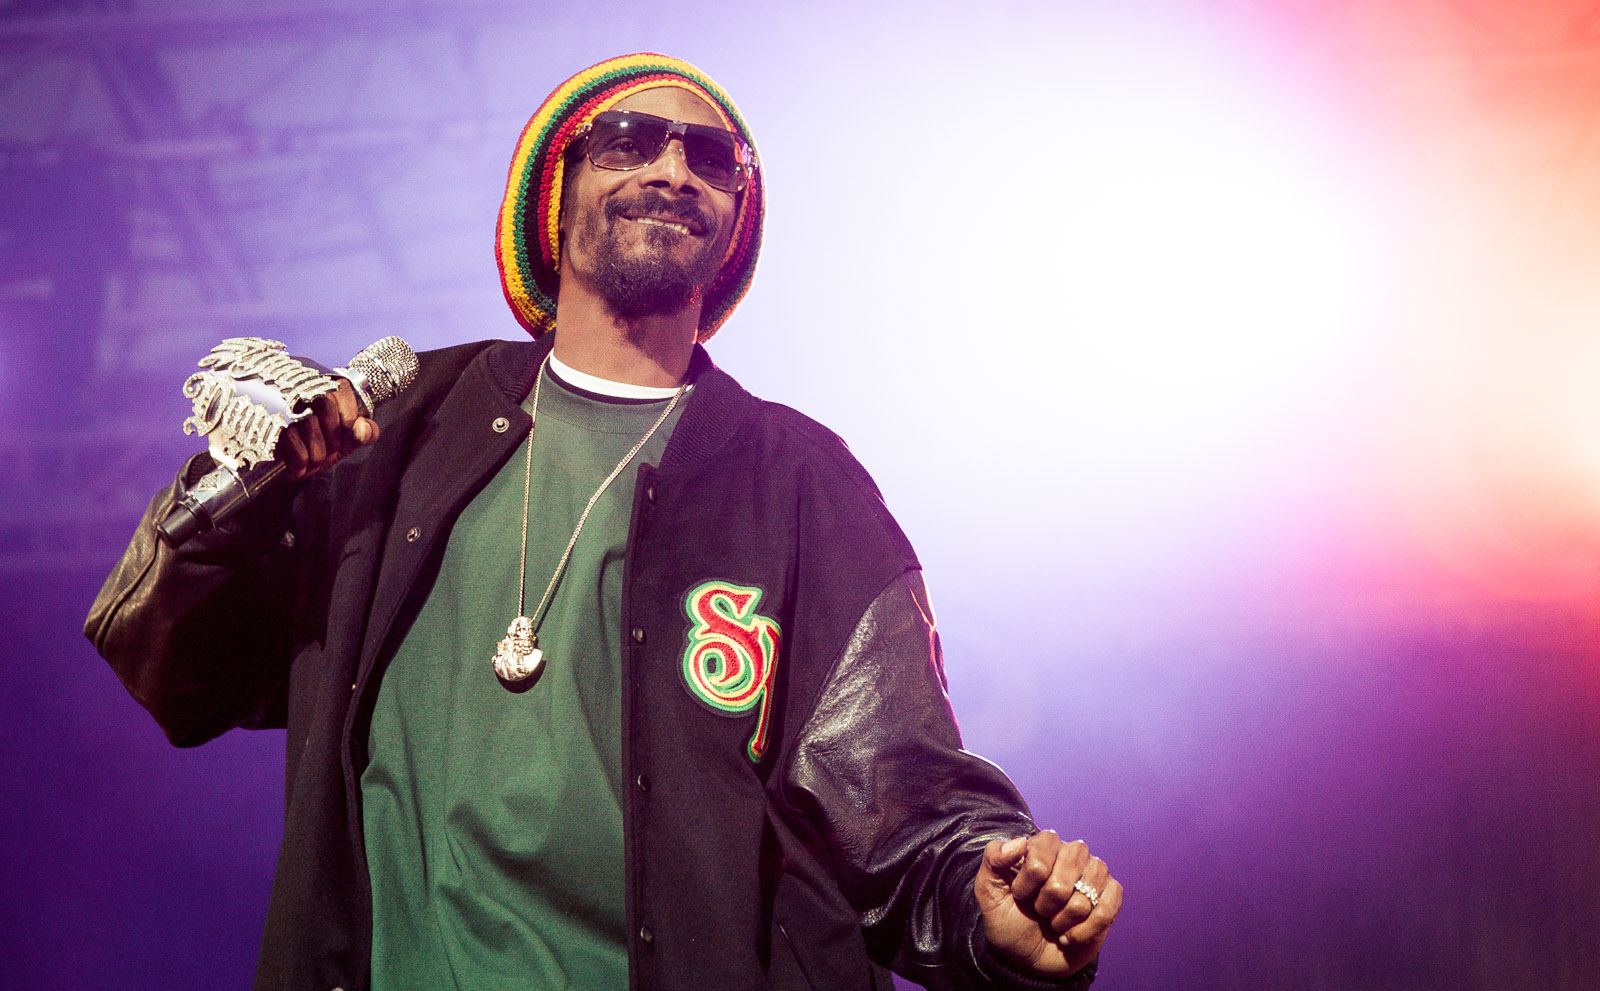 Snoop Dogg Launched His Own Esports League For Madden NFL 2019